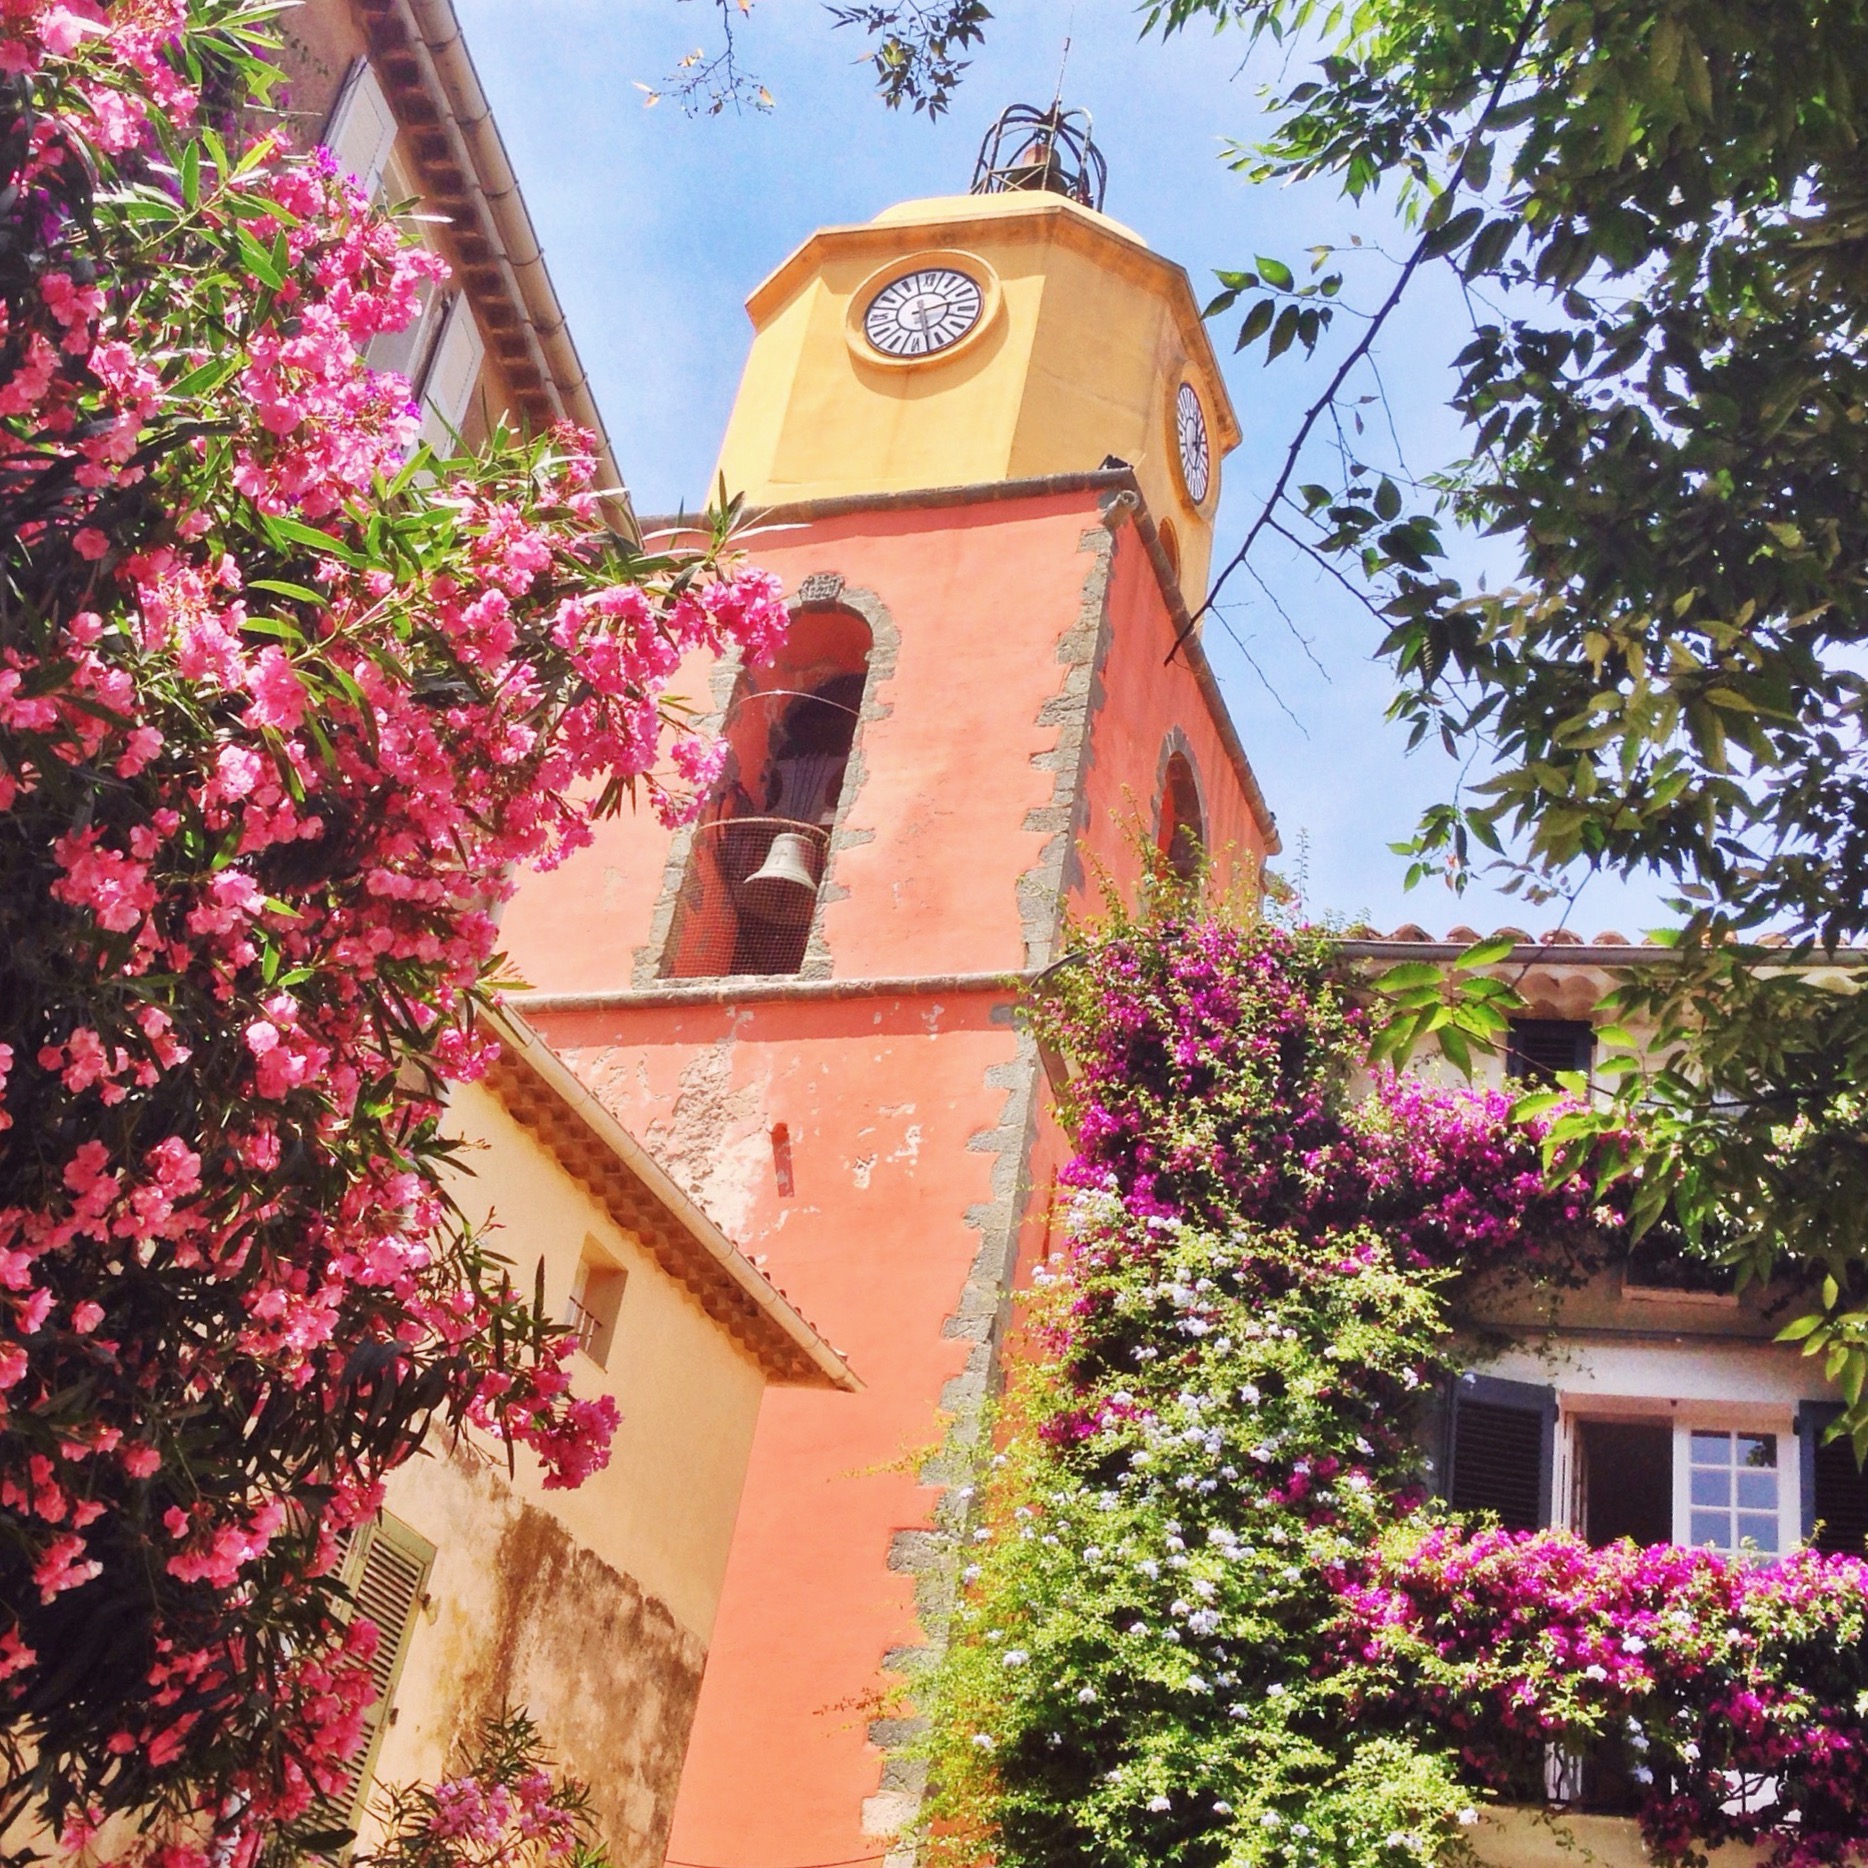 The Colourful Church of St. Tropez - Côte d'Azur - South of France (French Riviera)